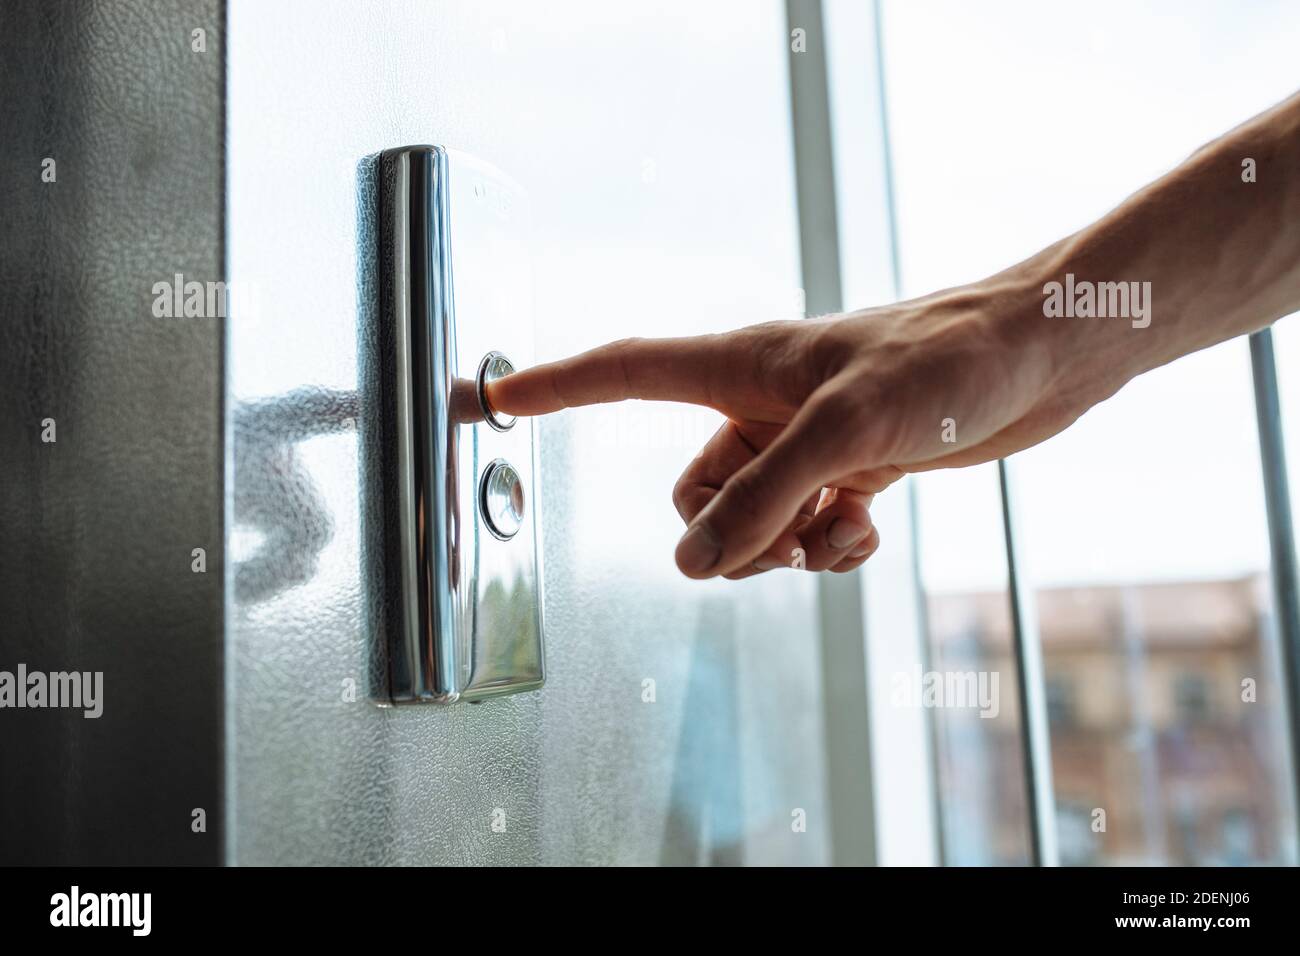 The thumb presses the Elevator button, a hand reaching for the button, the girl waiting for Elevator, push button start, isolated Stock Photo